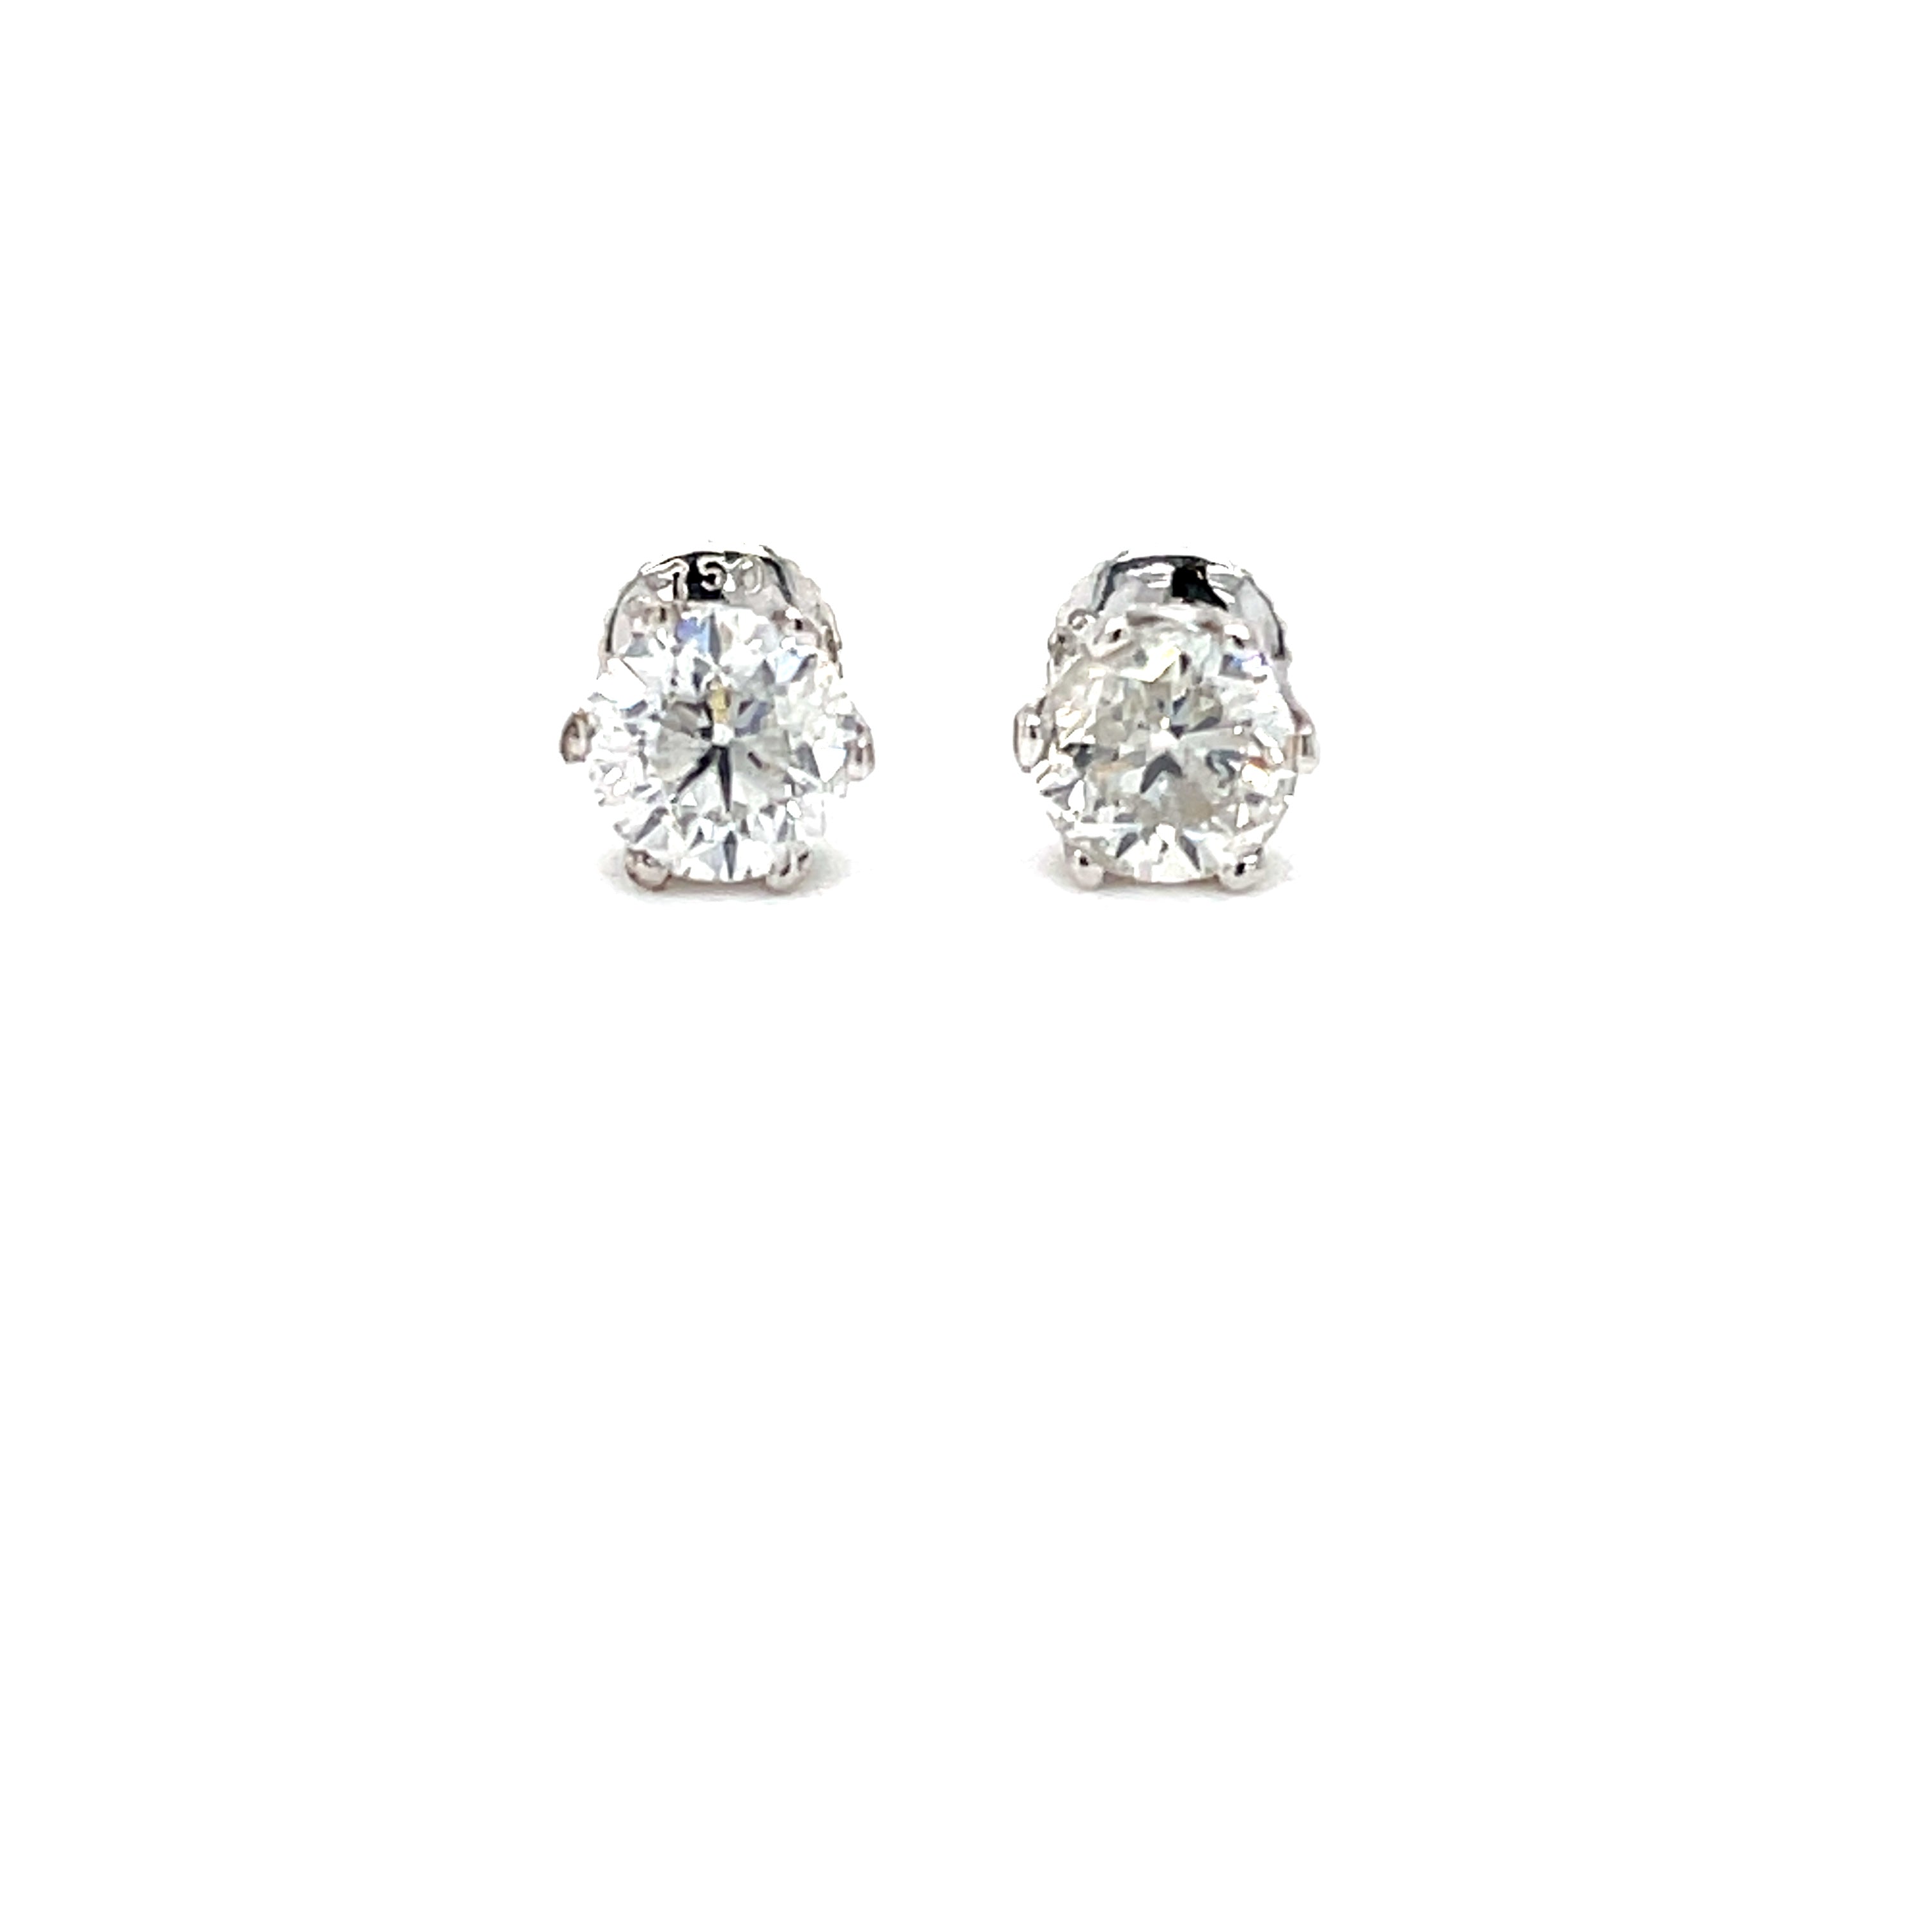 1.50ct Round Brilliant Cut Diamond Solitaire Stud Earrings 18ct White Gold SOLD